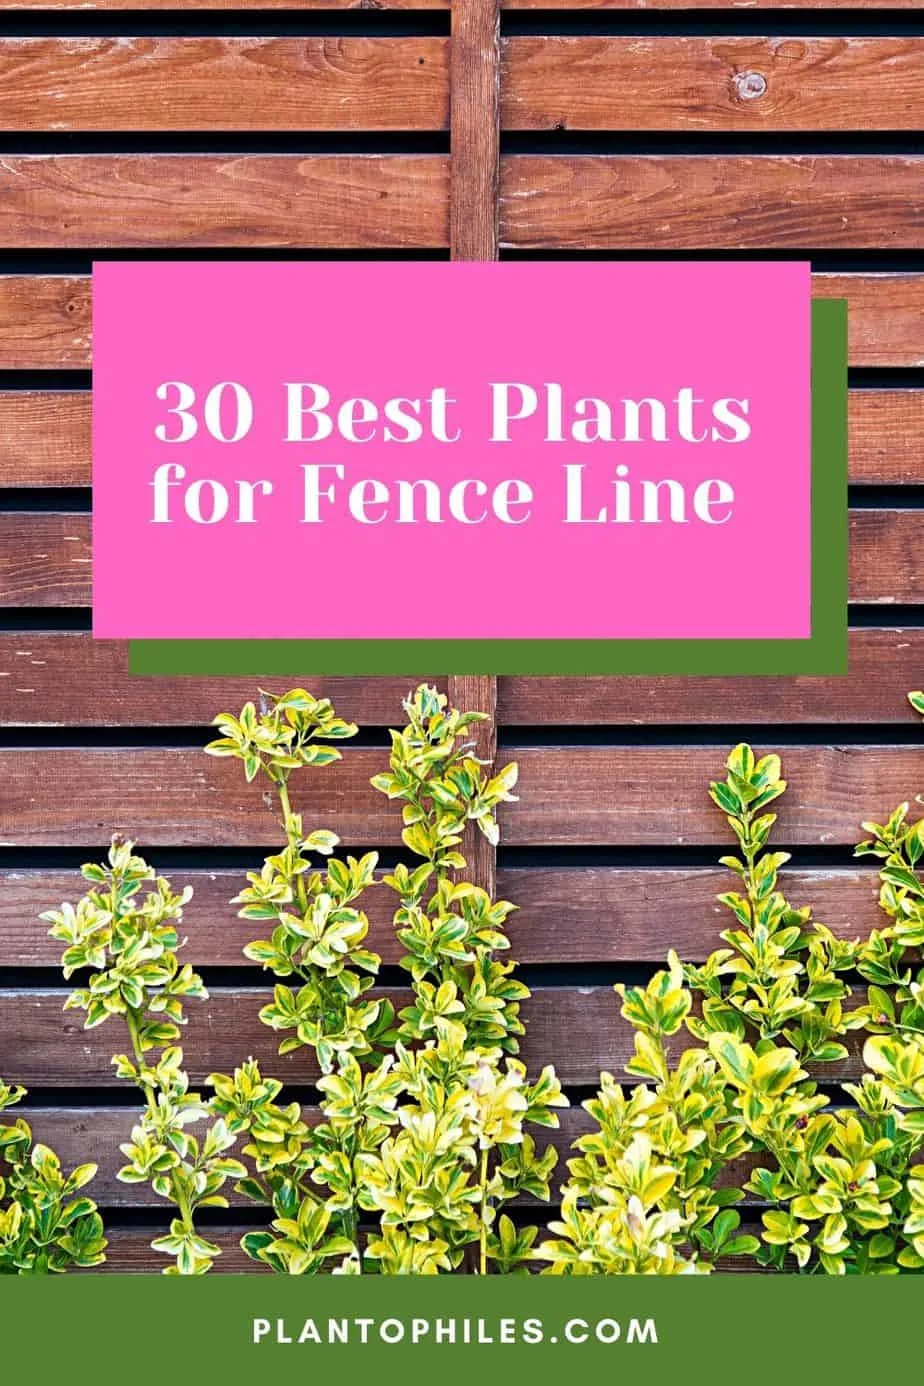 30 Best Plants for Fence Line